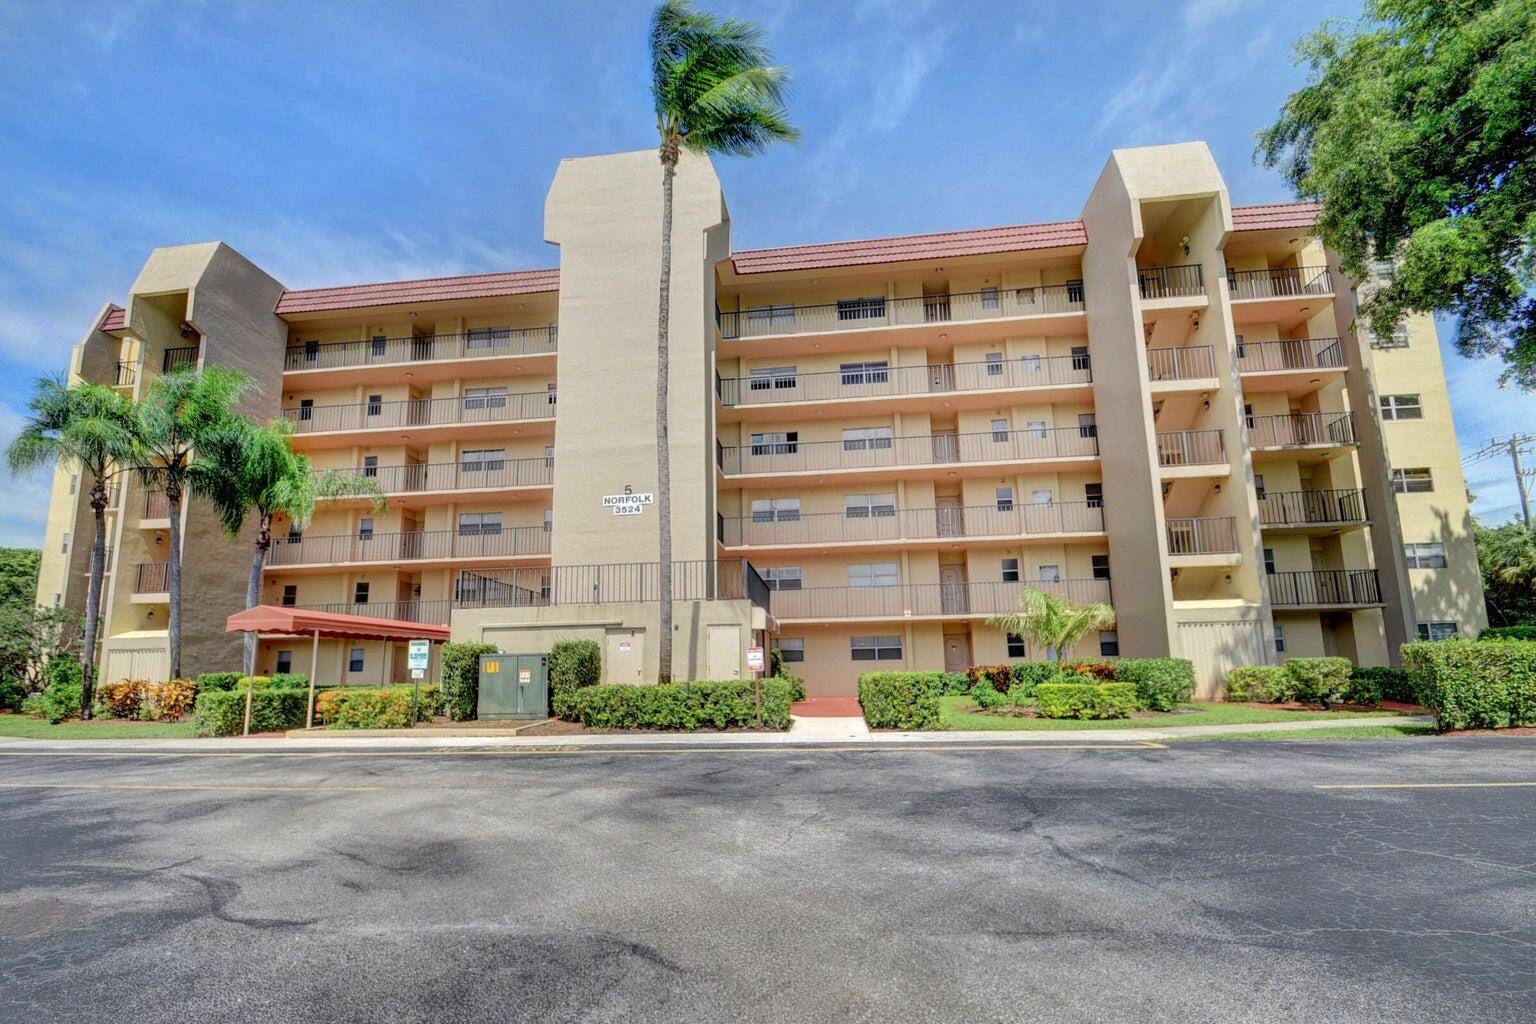 This Beautiful condo is located in the heart of west lake worth.